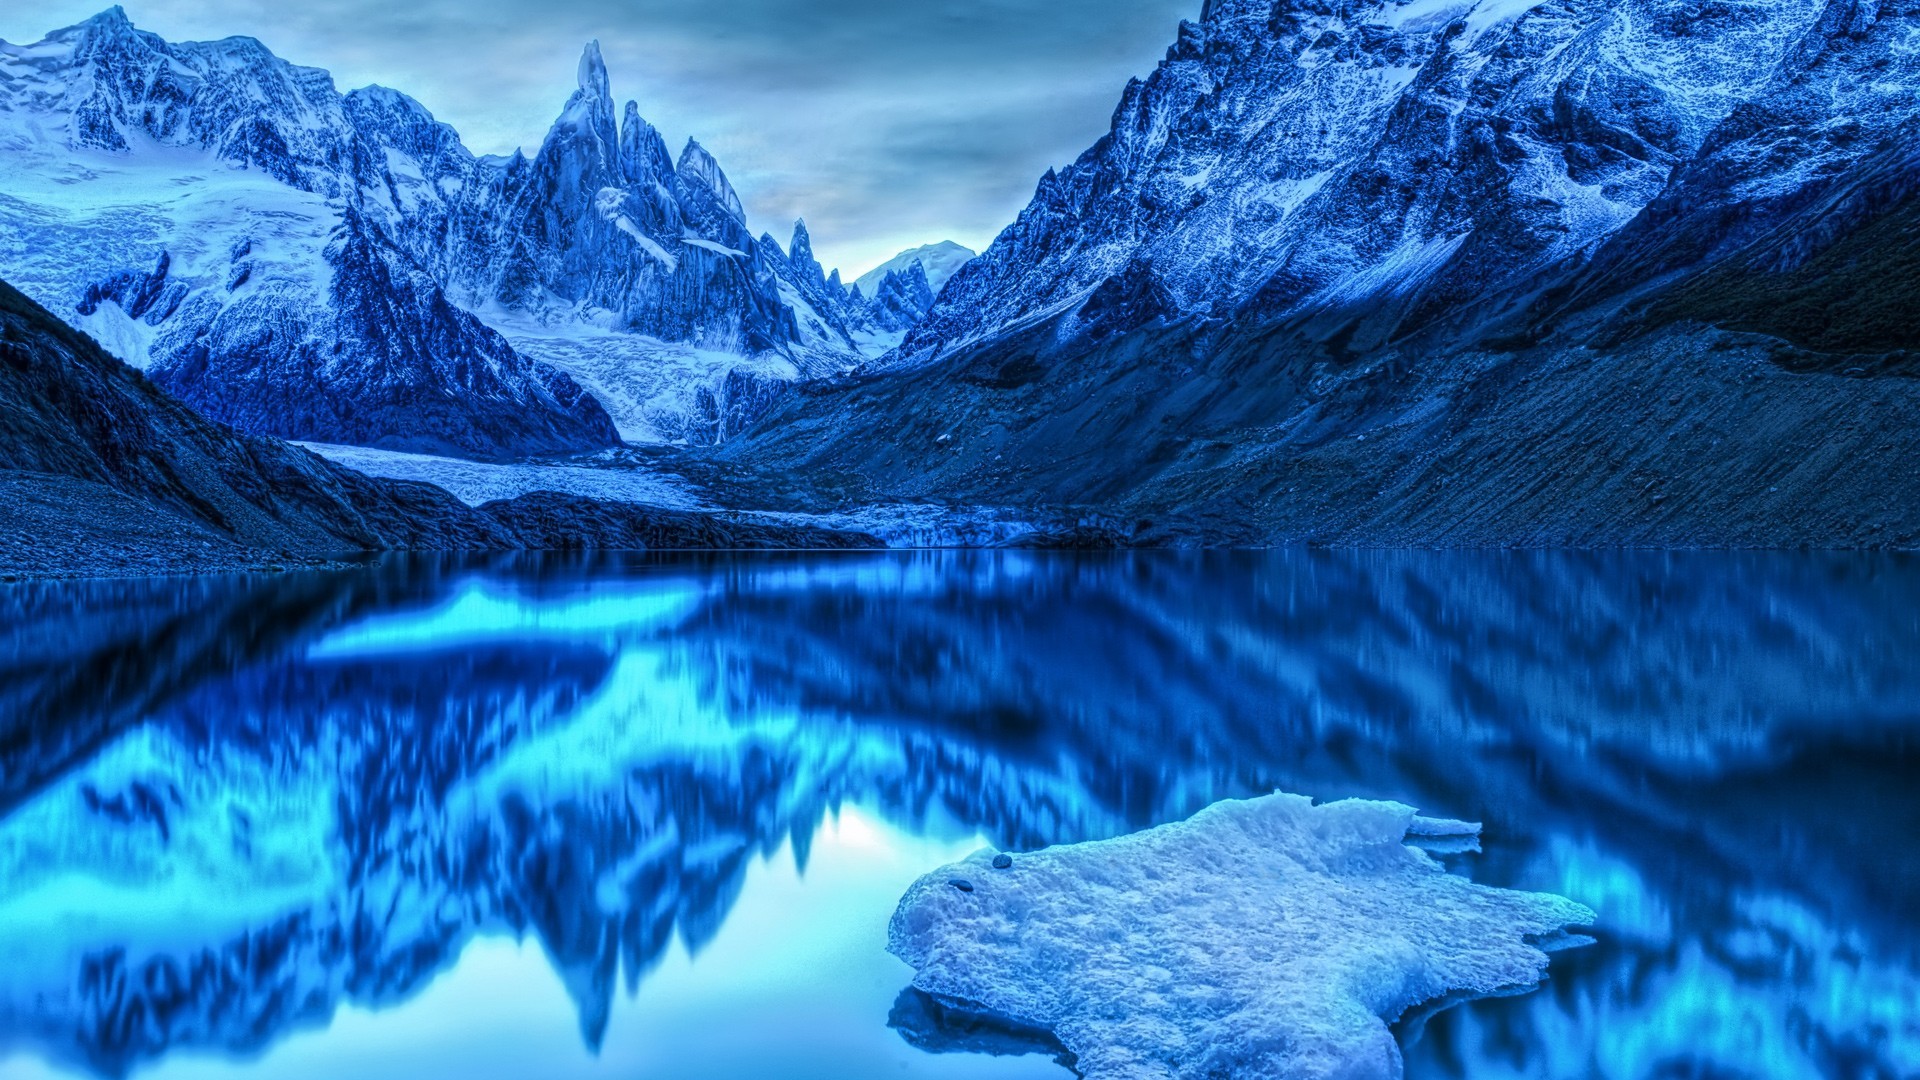 1920x1080 Lake In The Snowy Mountains Wallpaper